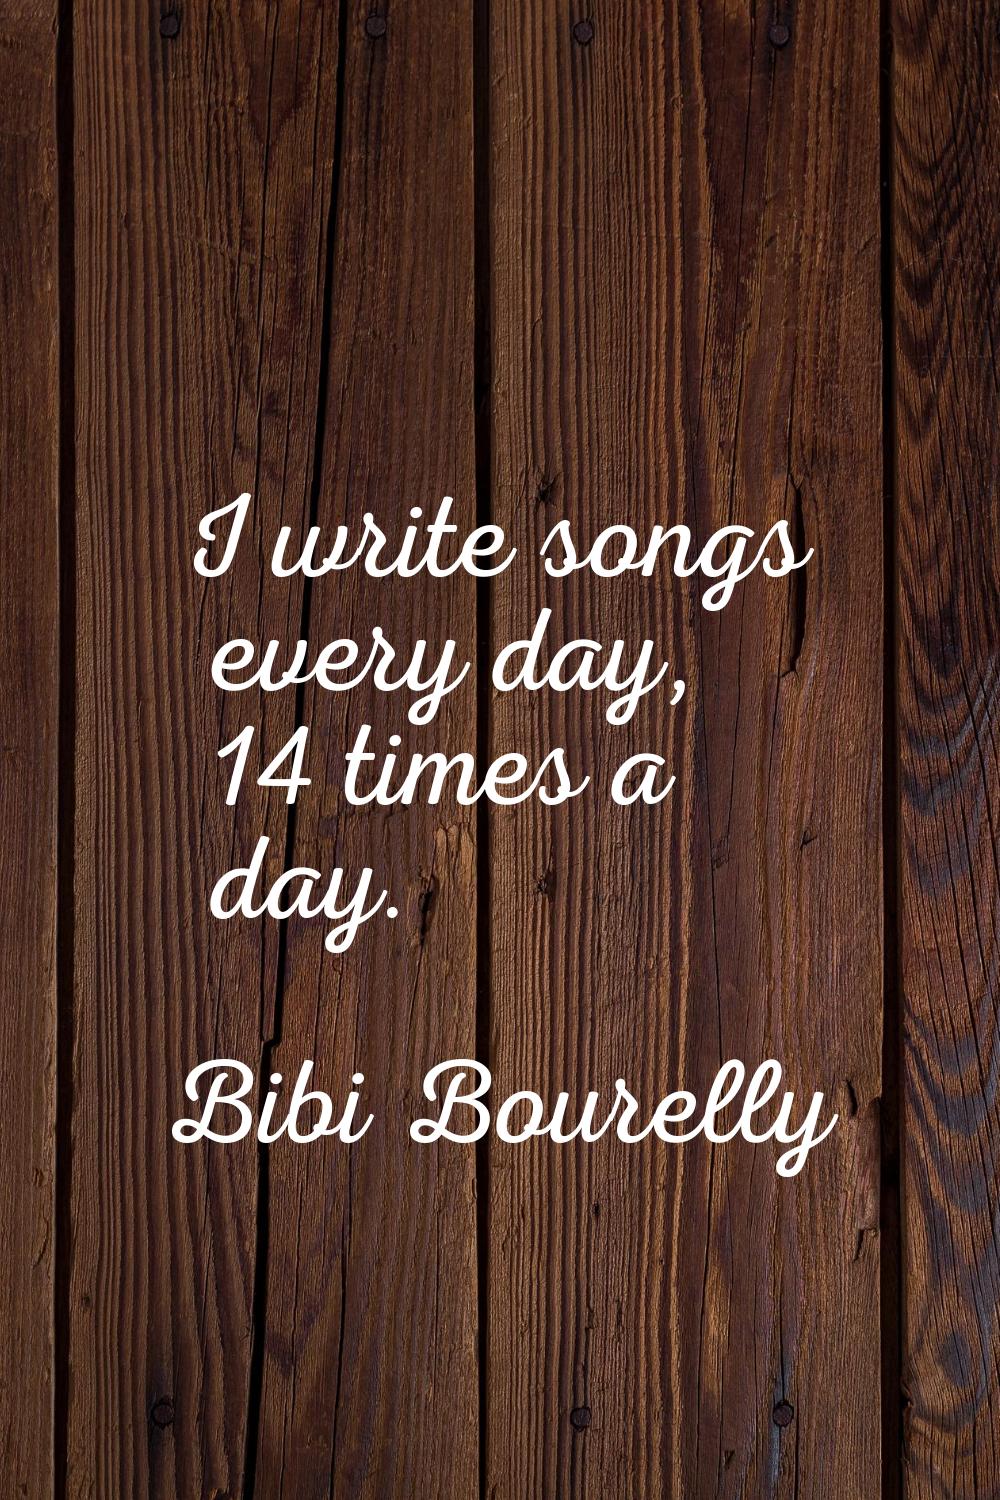 I write songs every day, 14 times a day.